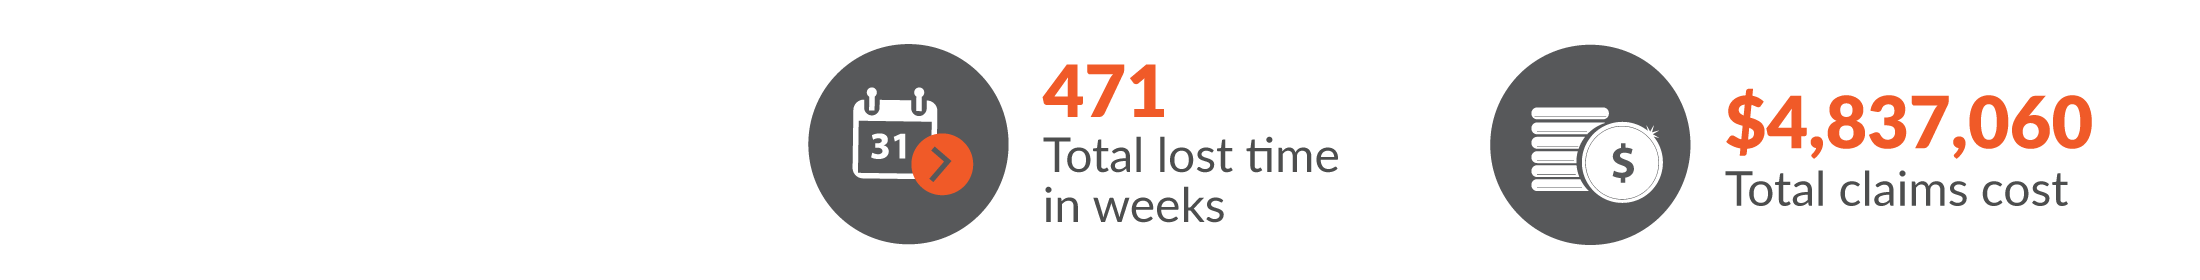 This infographic shows total workers compensation claims for Construction resulted in 471 total lost time in weeks and $4,837,060 was paid in benefits.